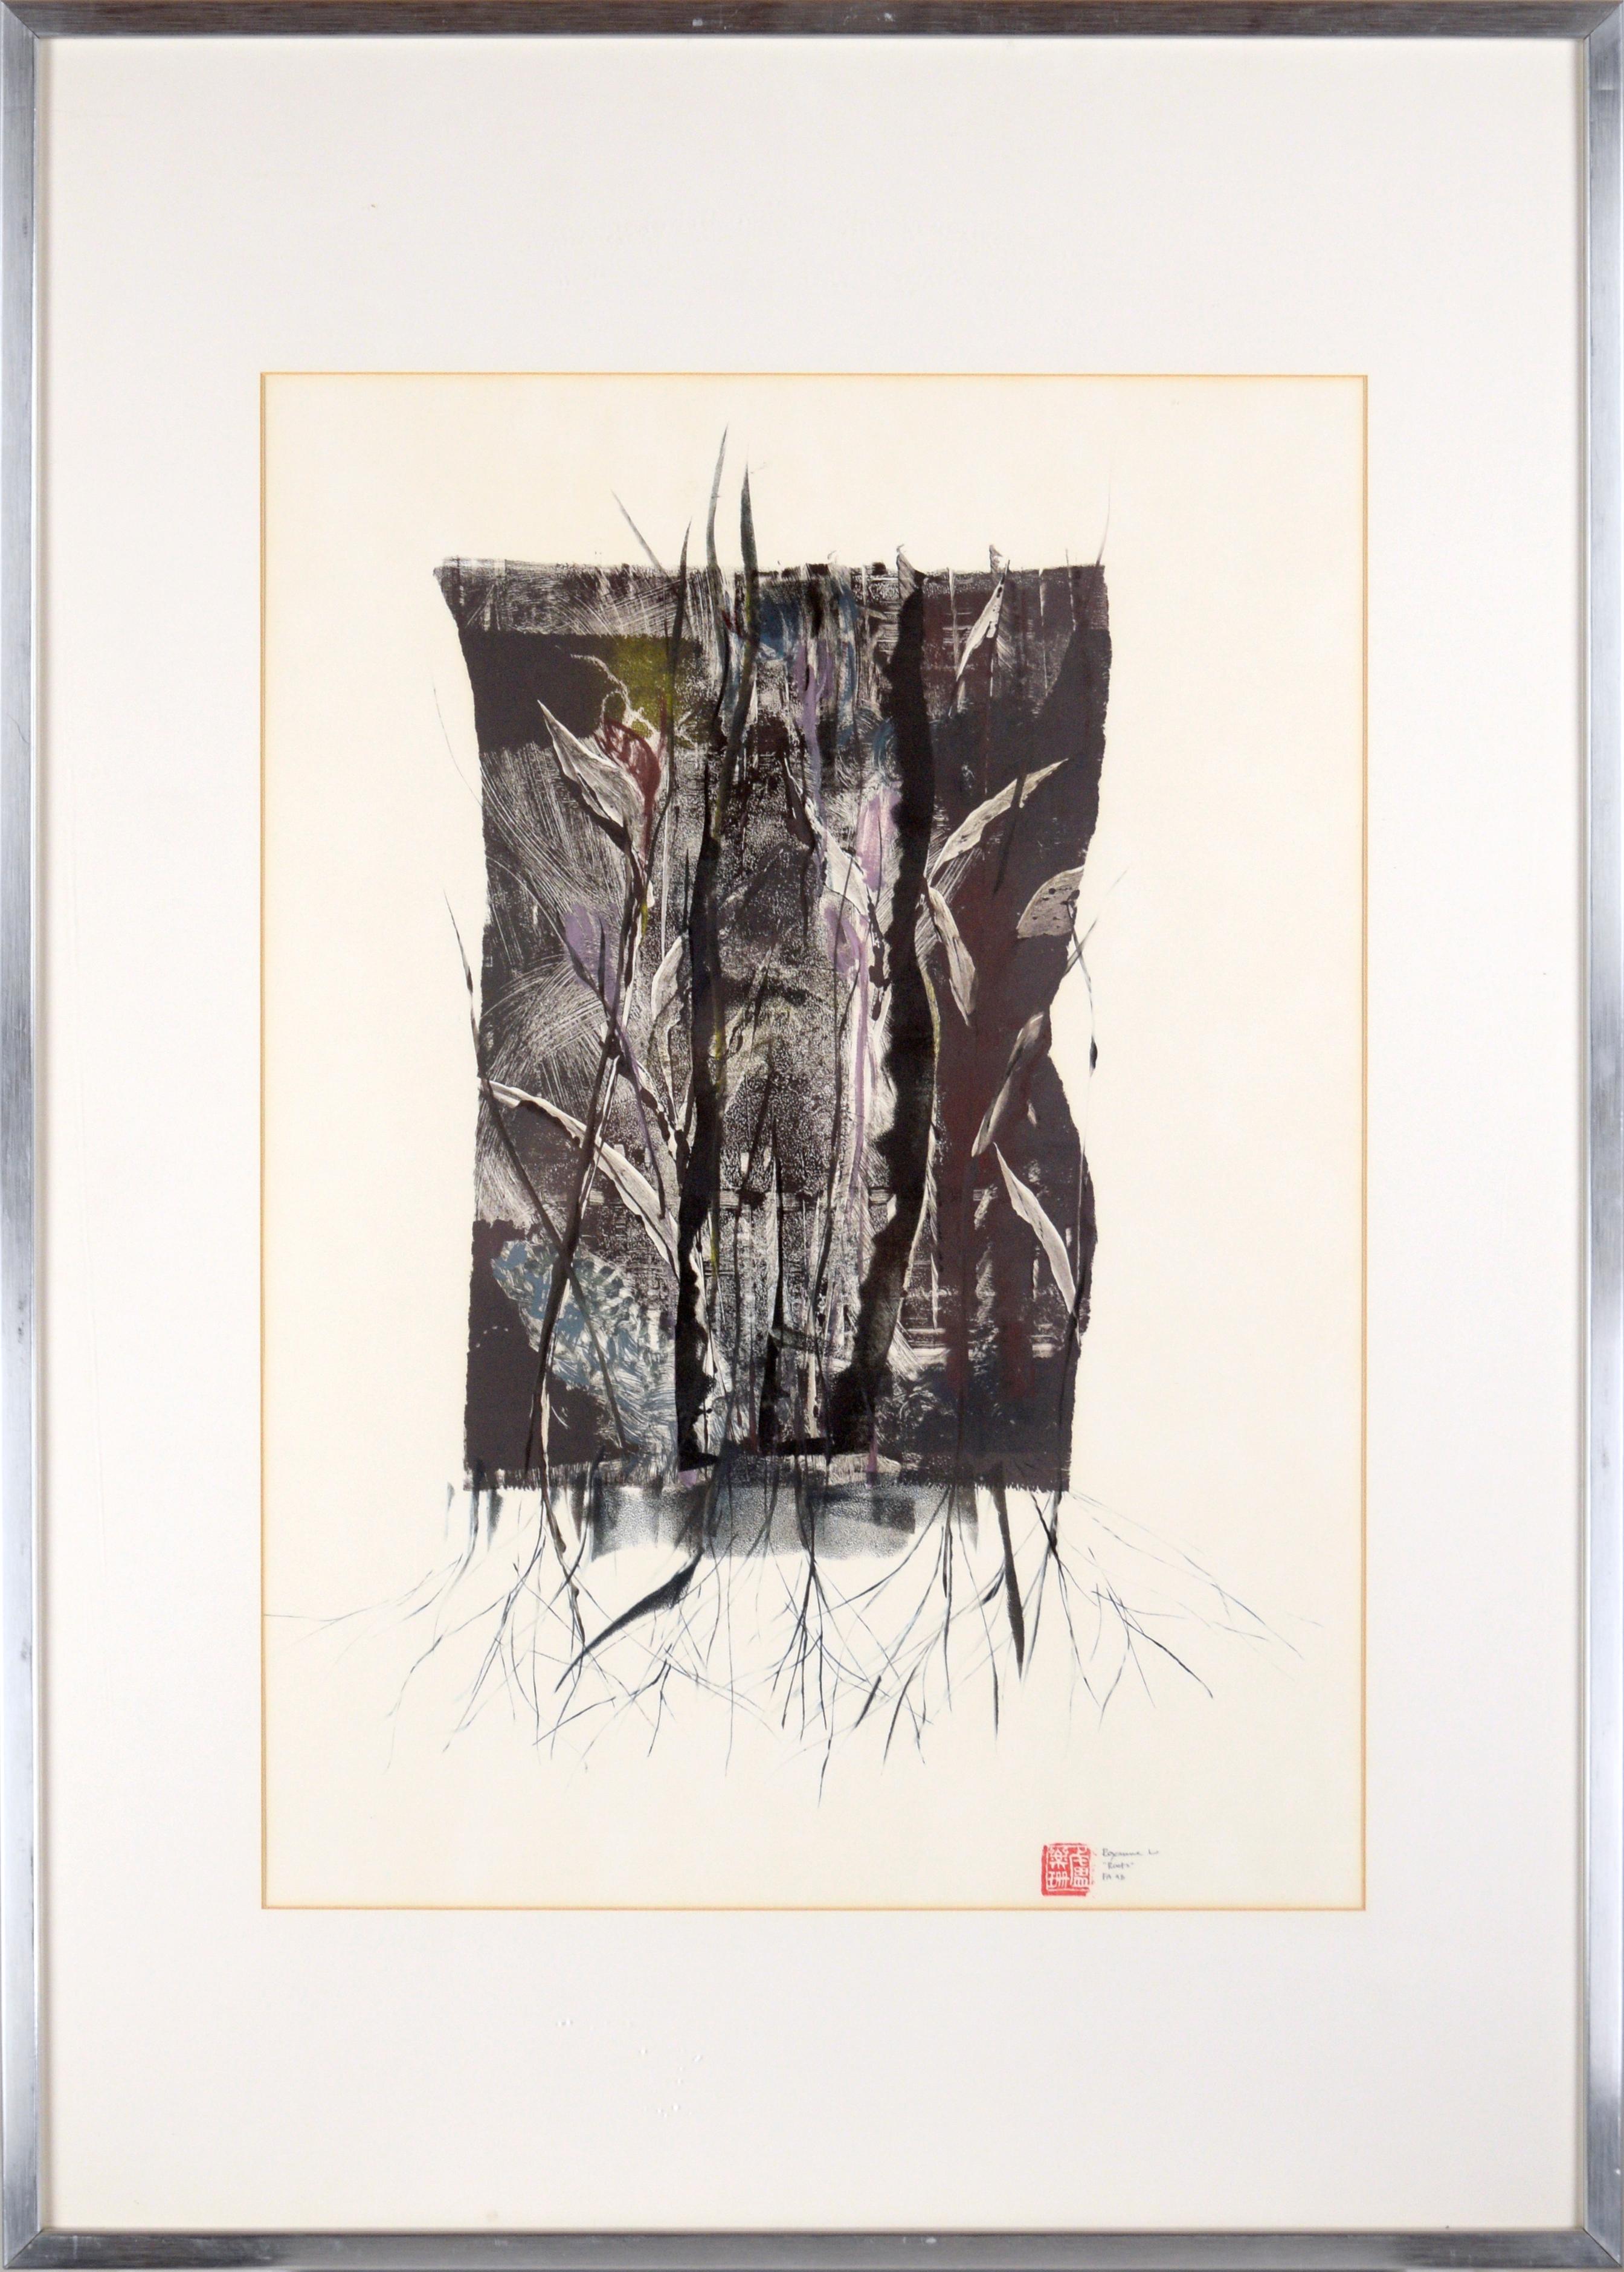 Roxanne Lo Abstract Print - "Roots" Abstract Monoprint in Ink on Paper